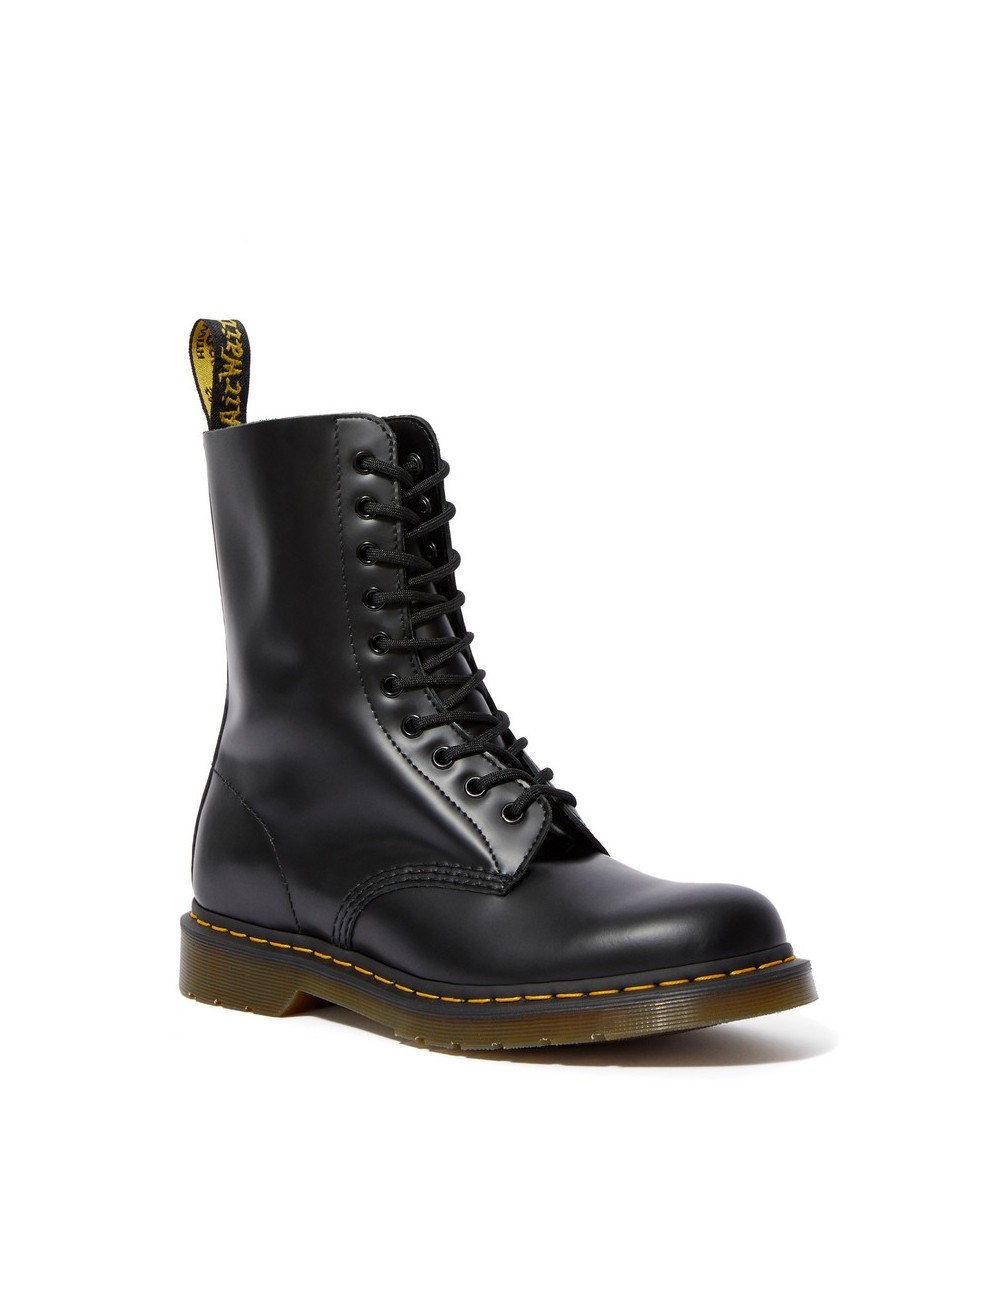 DR MARTENS 1490 SMOOTH LEATHER HIGH LACE UP BOOTS